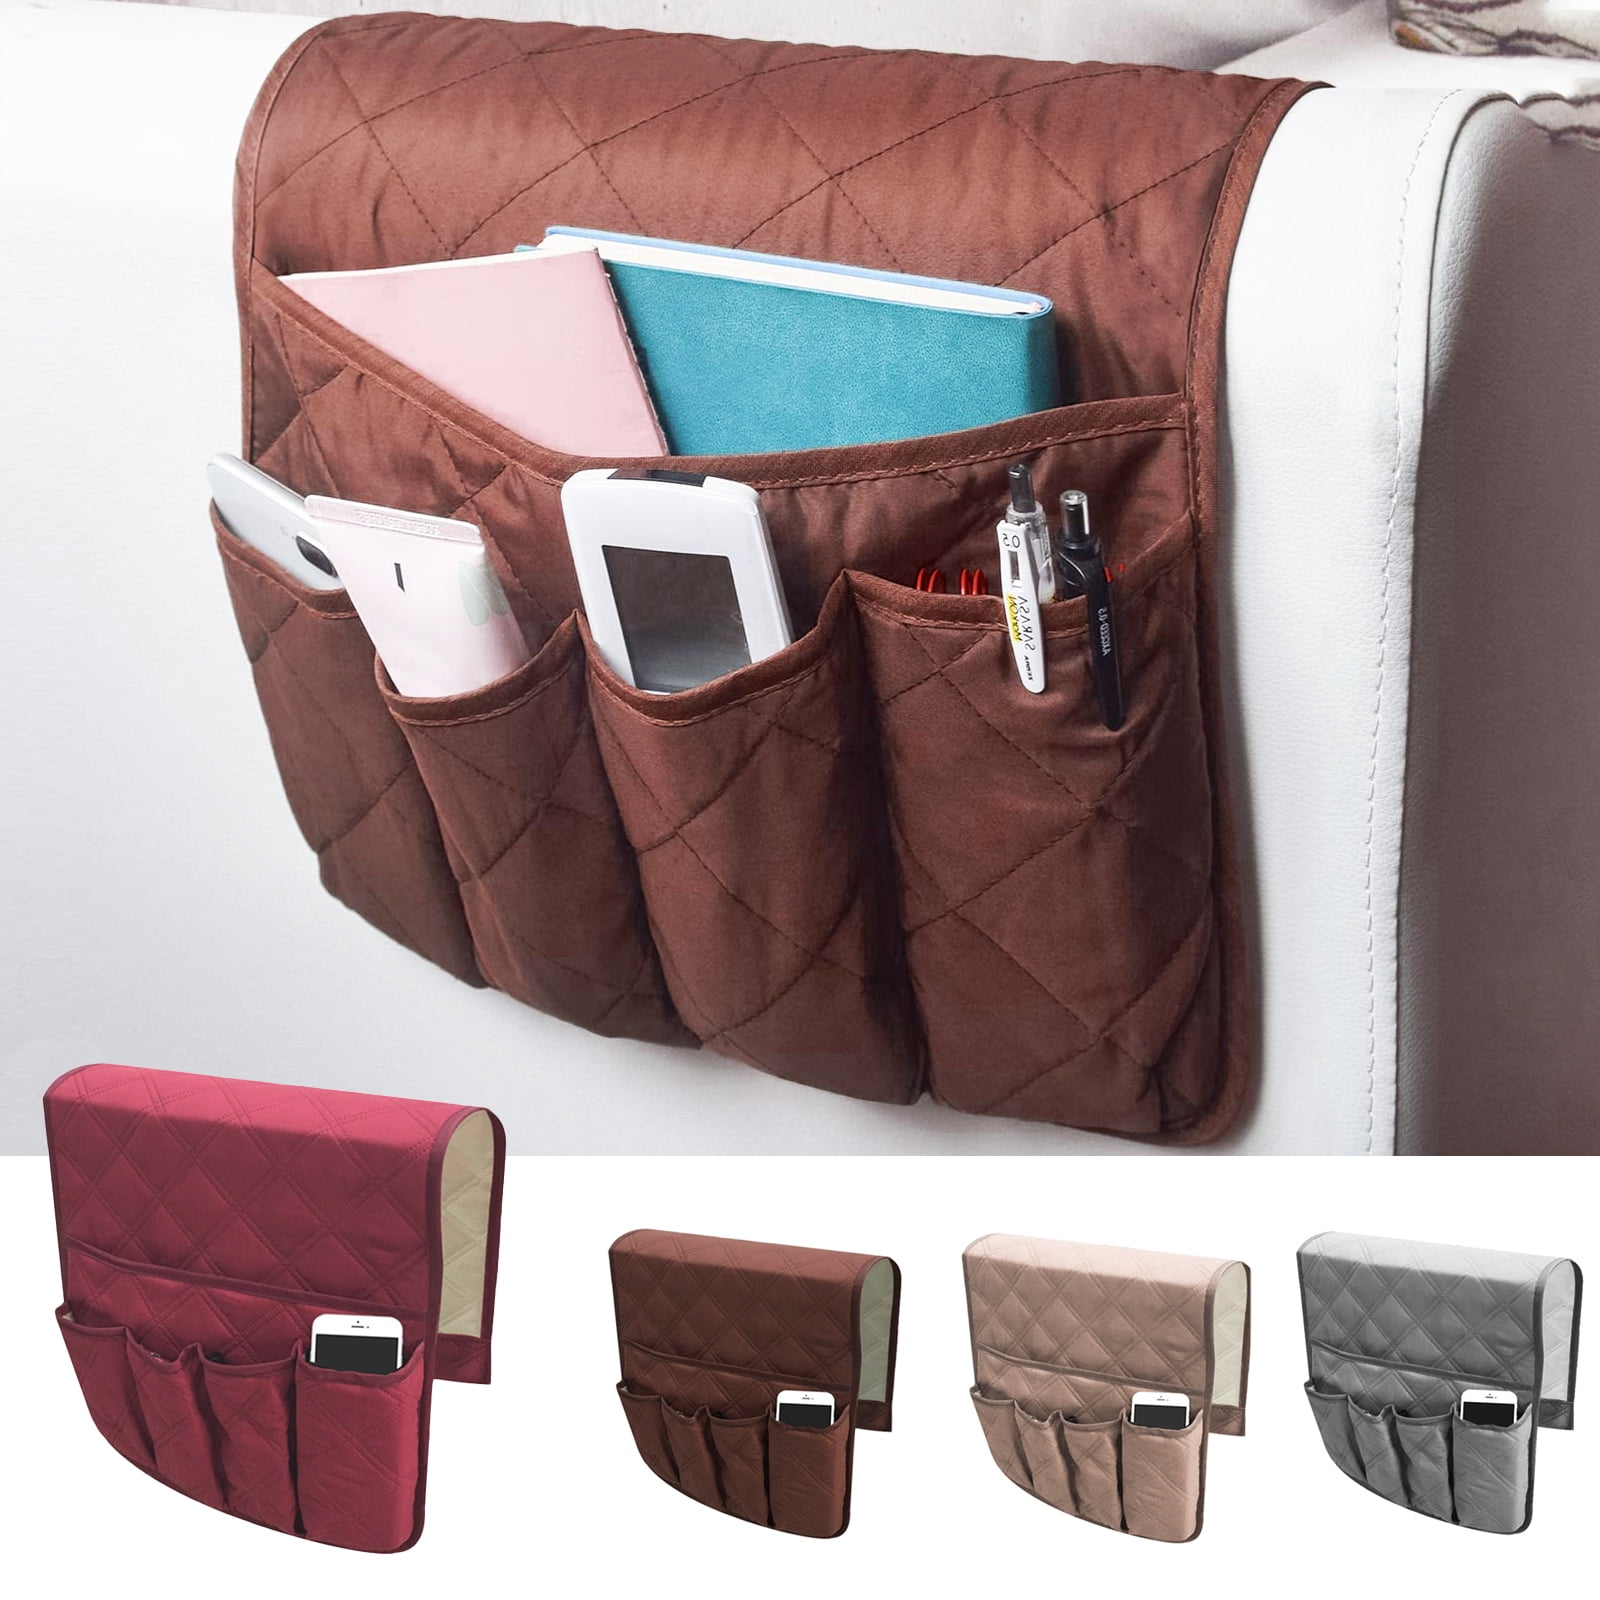 Sofa Chair Armrest Storage Organizer Non-Slip Couch Recliner Remote Control Holder Waterproof Sofa Arm Tidy Hanging Storage Bag with 5 Pockets Holder Pouch for Cellphone Tablet Notepad Book Magazines 